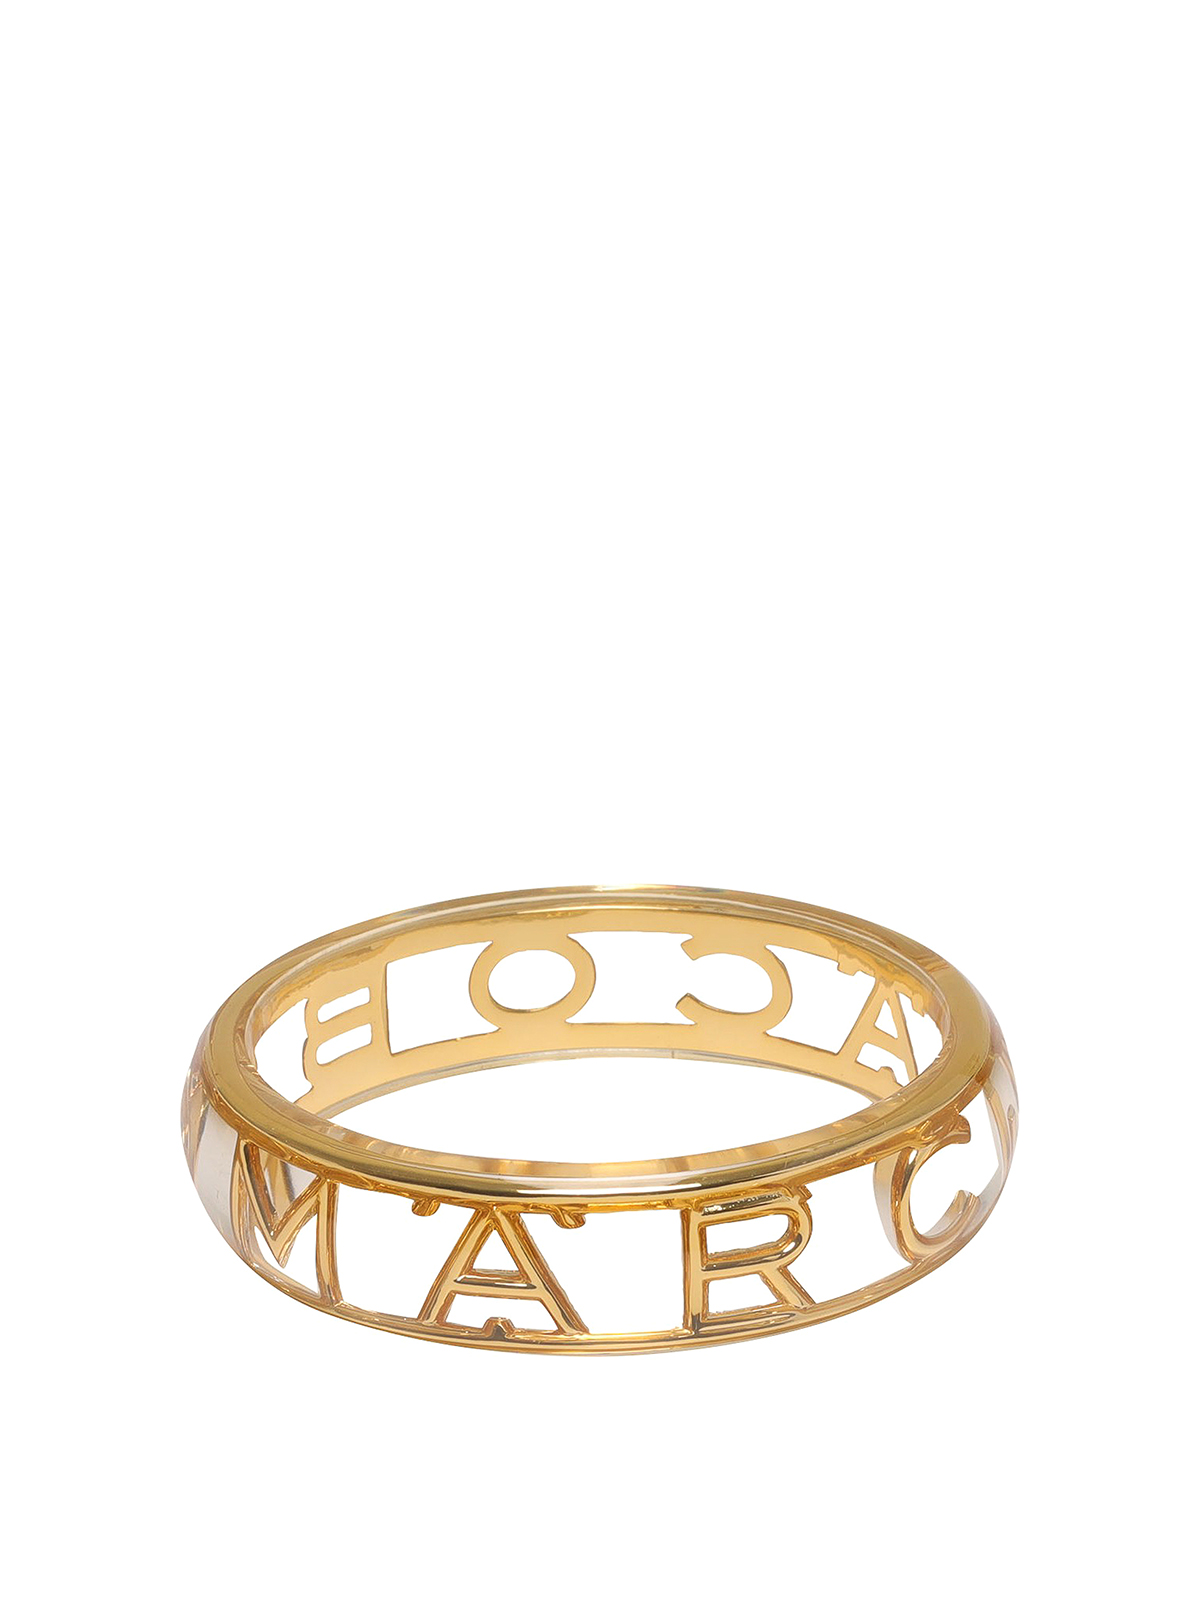 The Medallion Scalloped Bangle - Marc Jacobs - Purchase on Ventis.